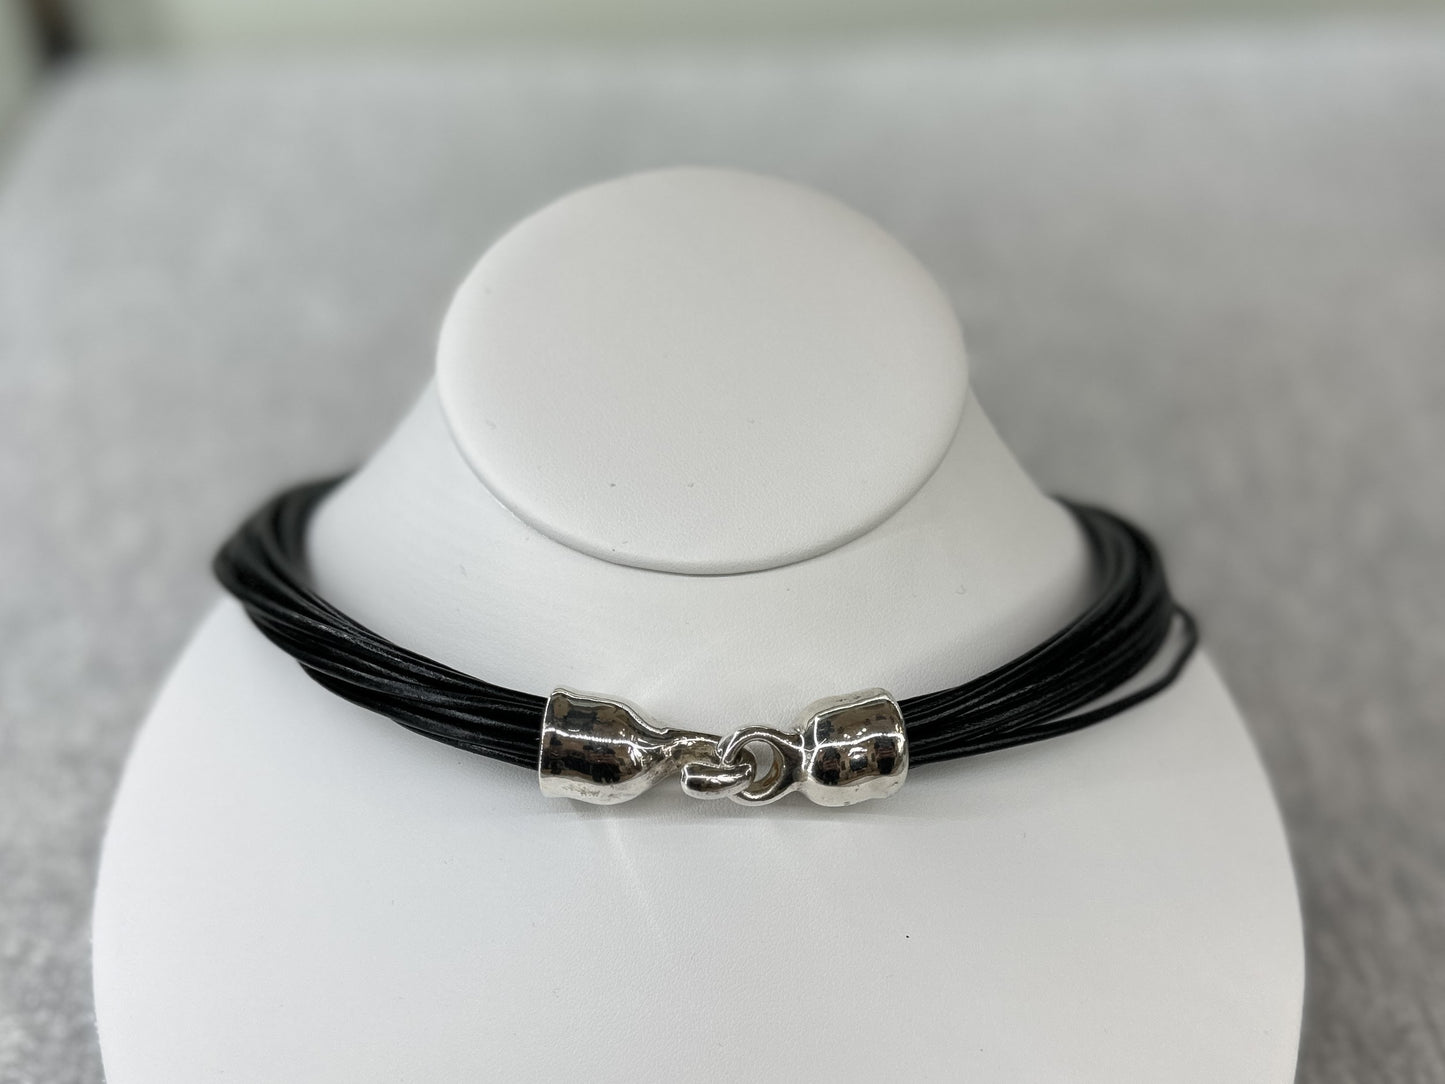 Copy of Simon Sebbag Designs- Black Leather with Sterling Silver Bead